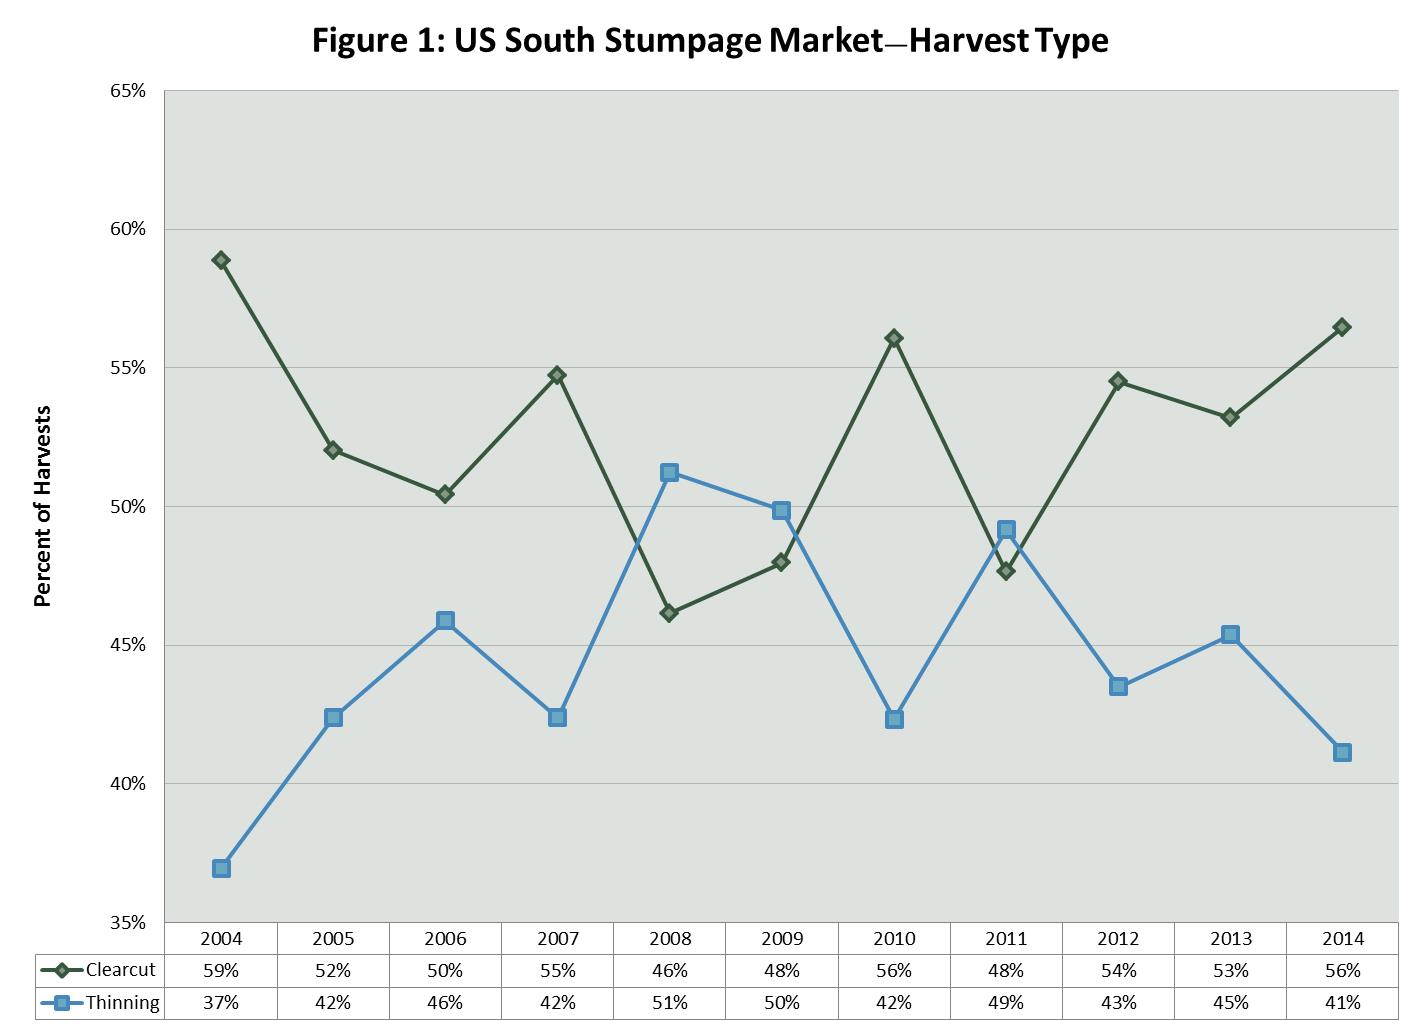 Stumpage Market Trends in the US South: Harvest Type and Tons per Acre